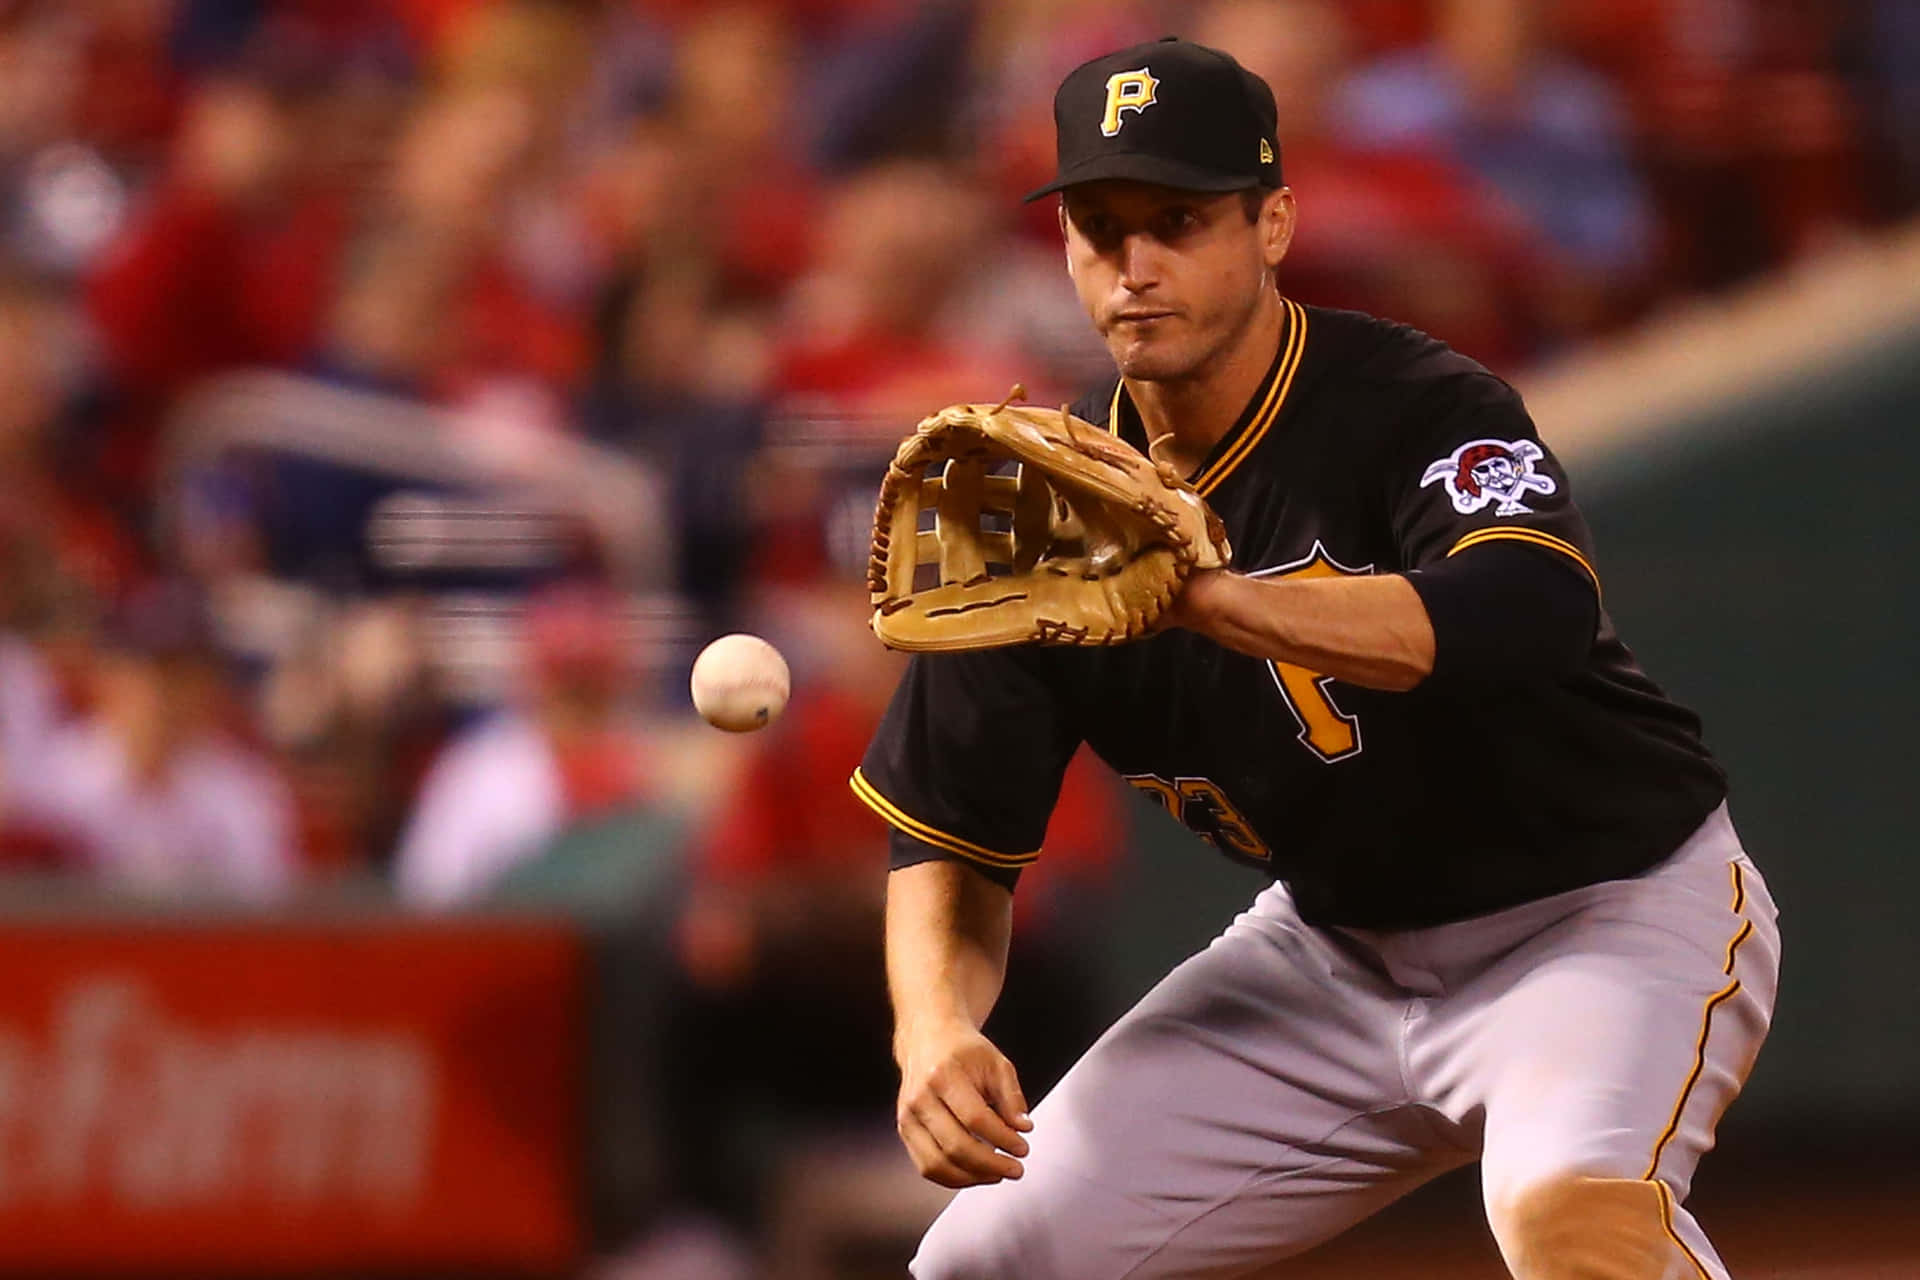 Download David Freese In Action During A Game Wallpaper